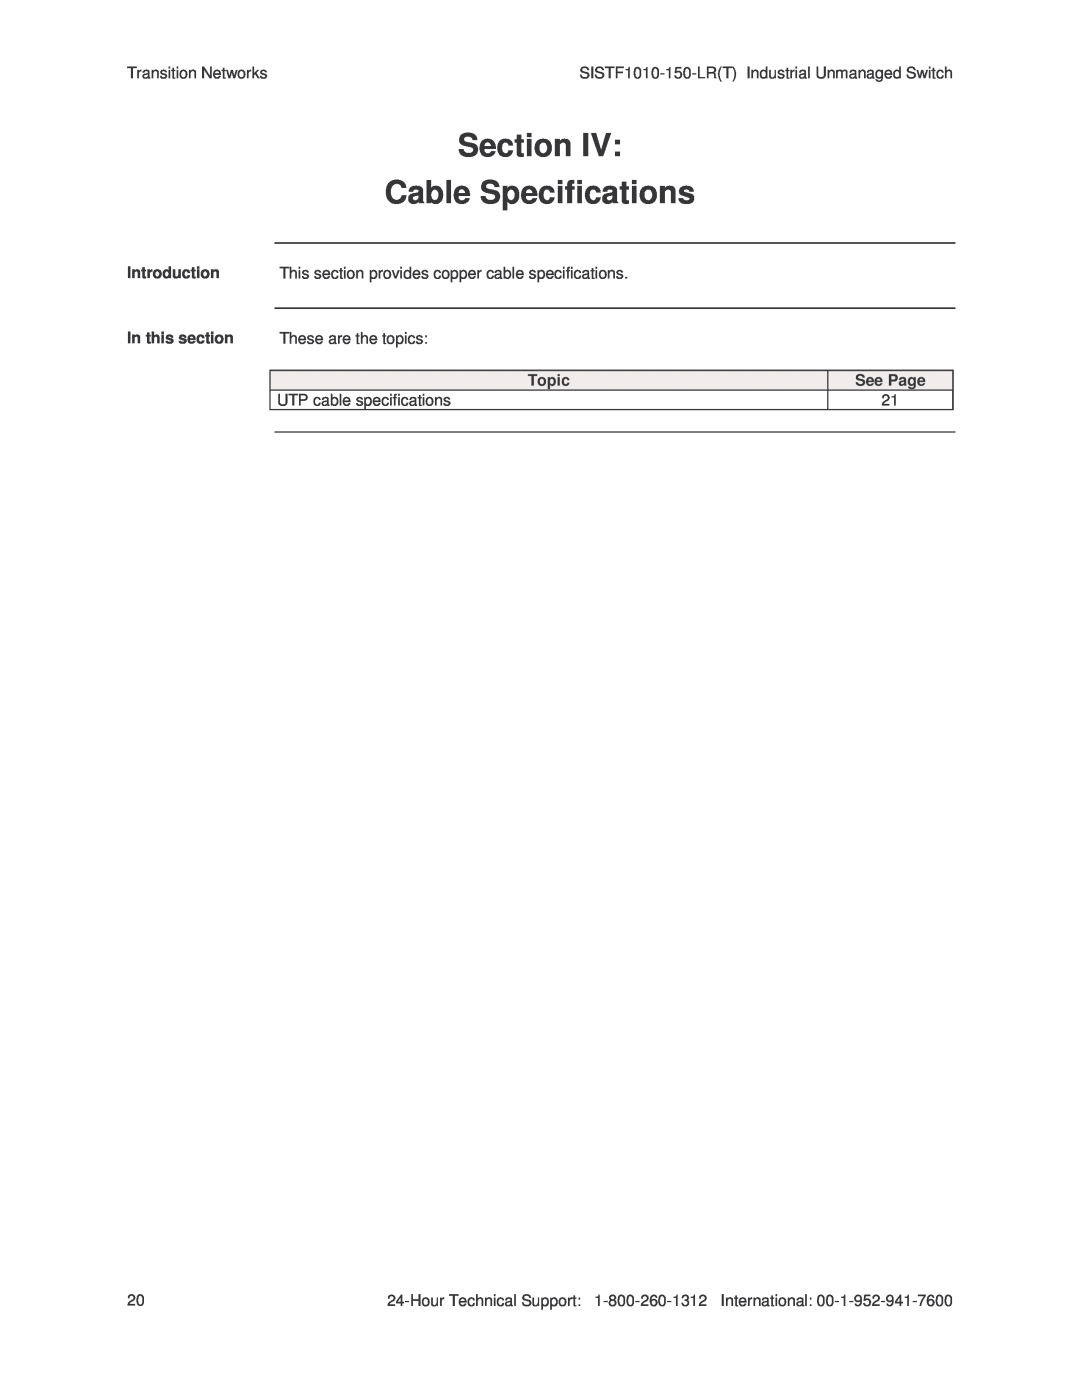 Transition Networks SISTF1010-150-LR(T) Section Cable Specifications, Transition Networks, Introduction, In this section 